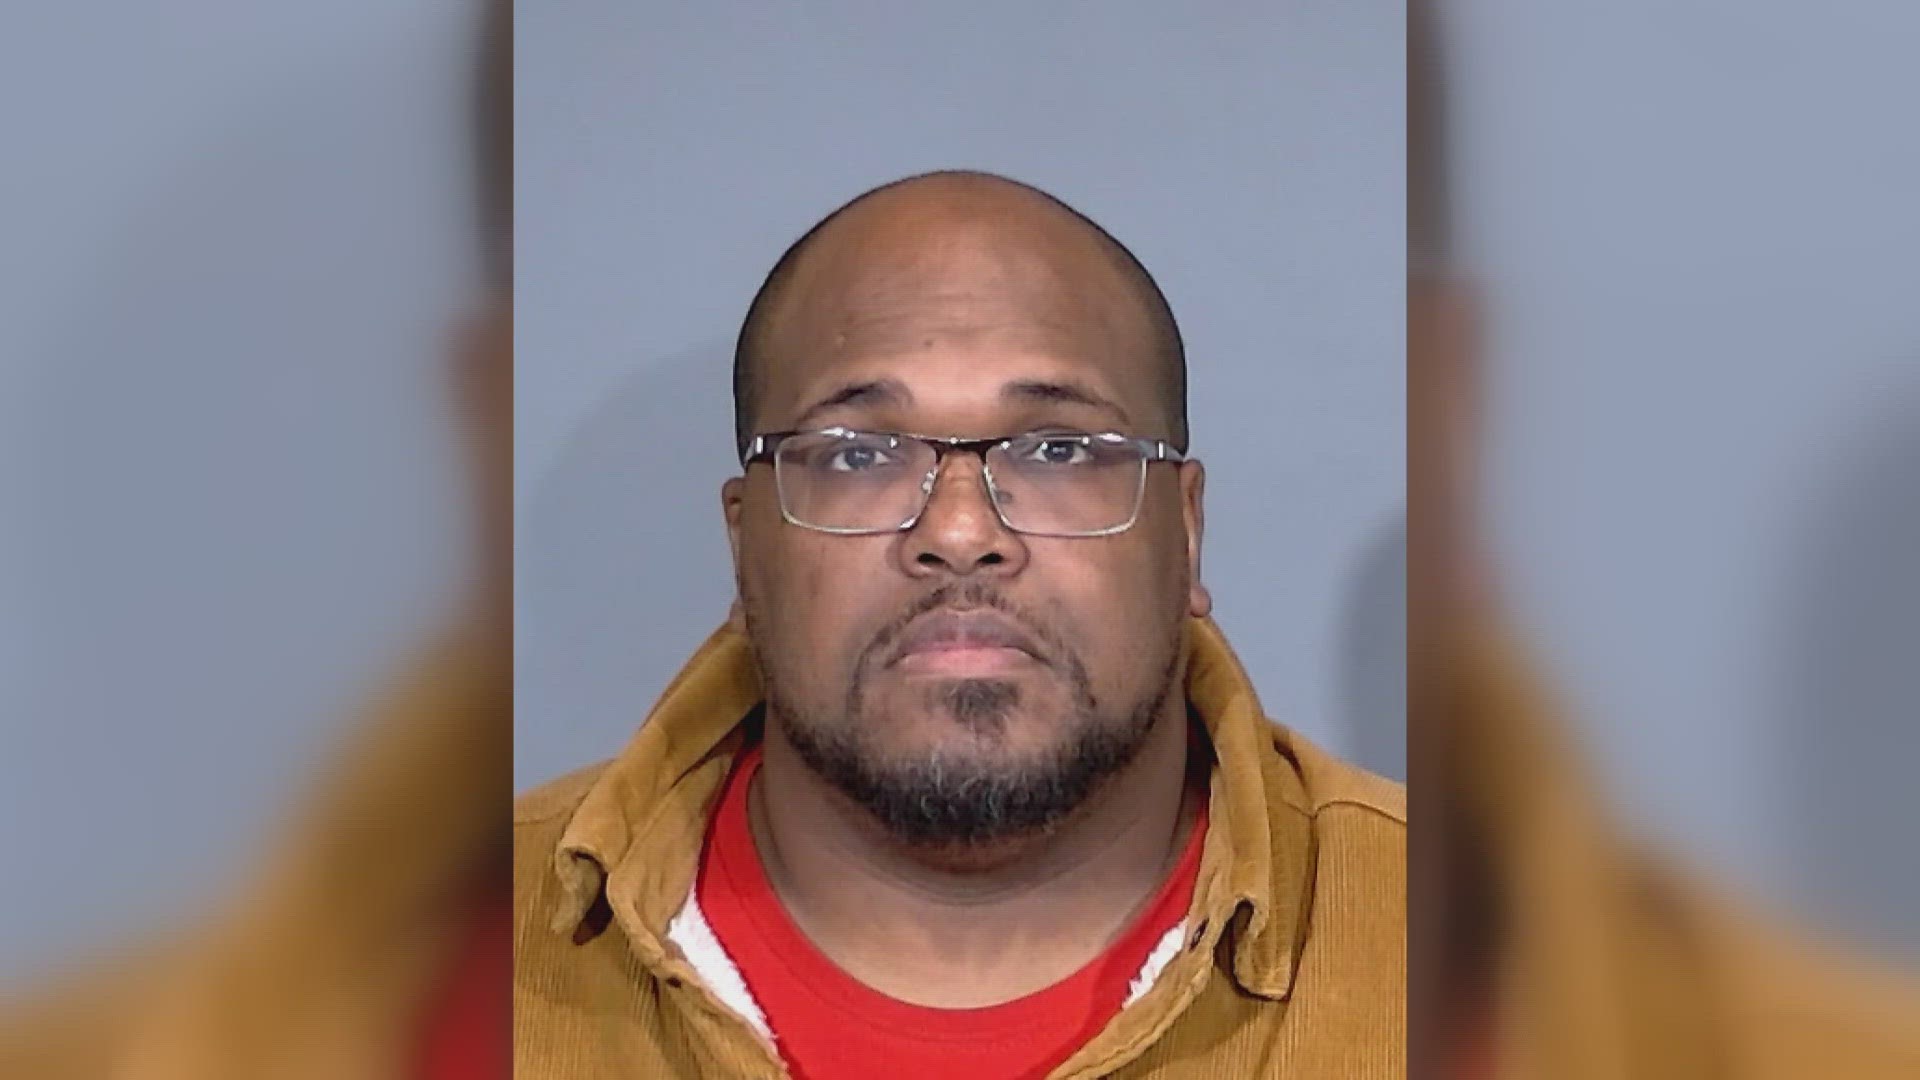 Tyree Coleman faces multiple felonies, accused of using donations to Refuge Place Indy to pay for prostitution.